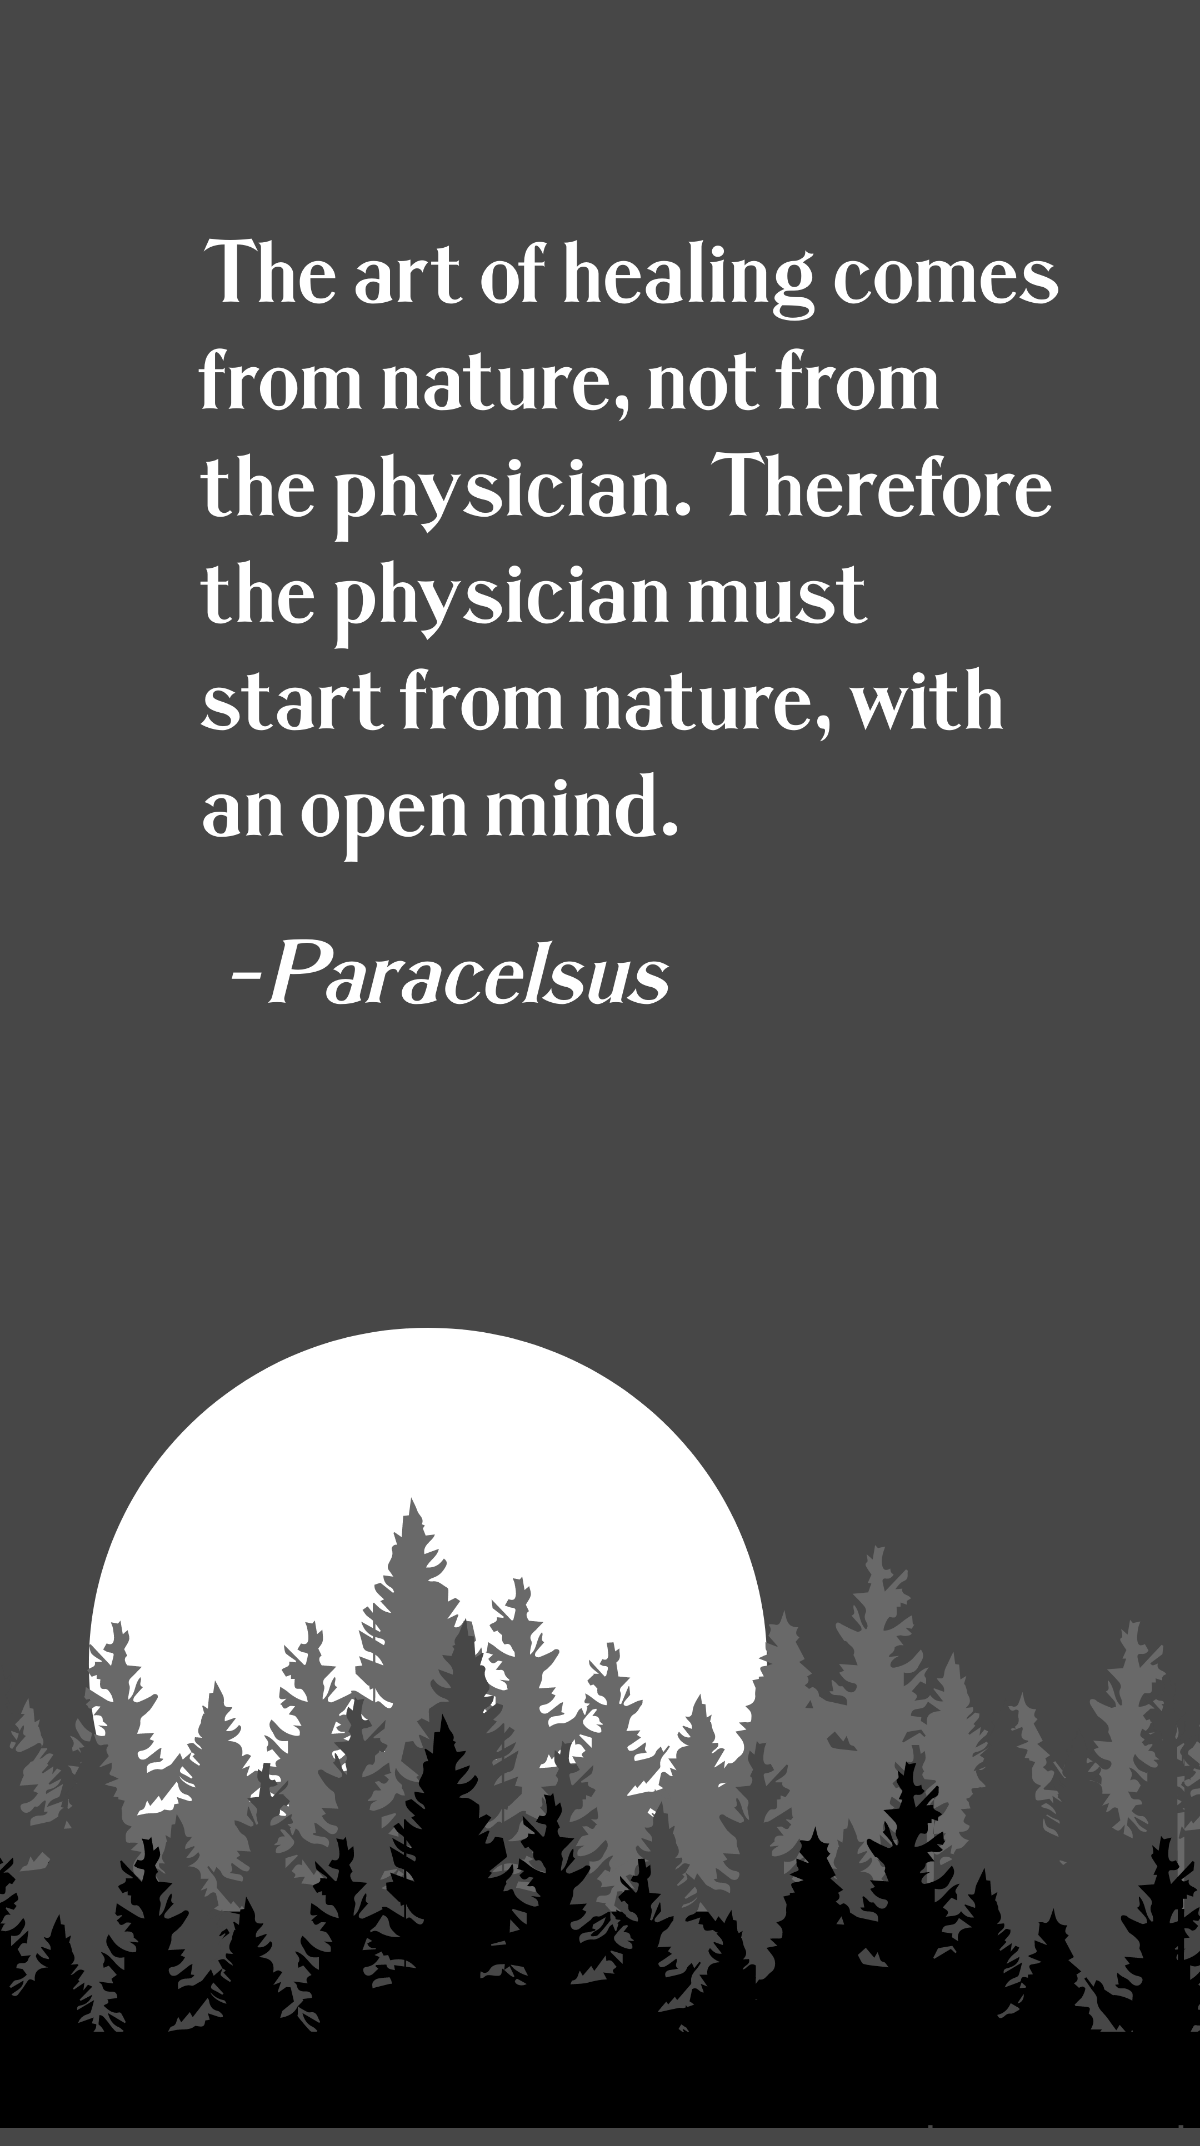 Paracelsus - The art of healing comes from nature, not from the physician. Therefore the physician must start from nature, with an open mind. Template